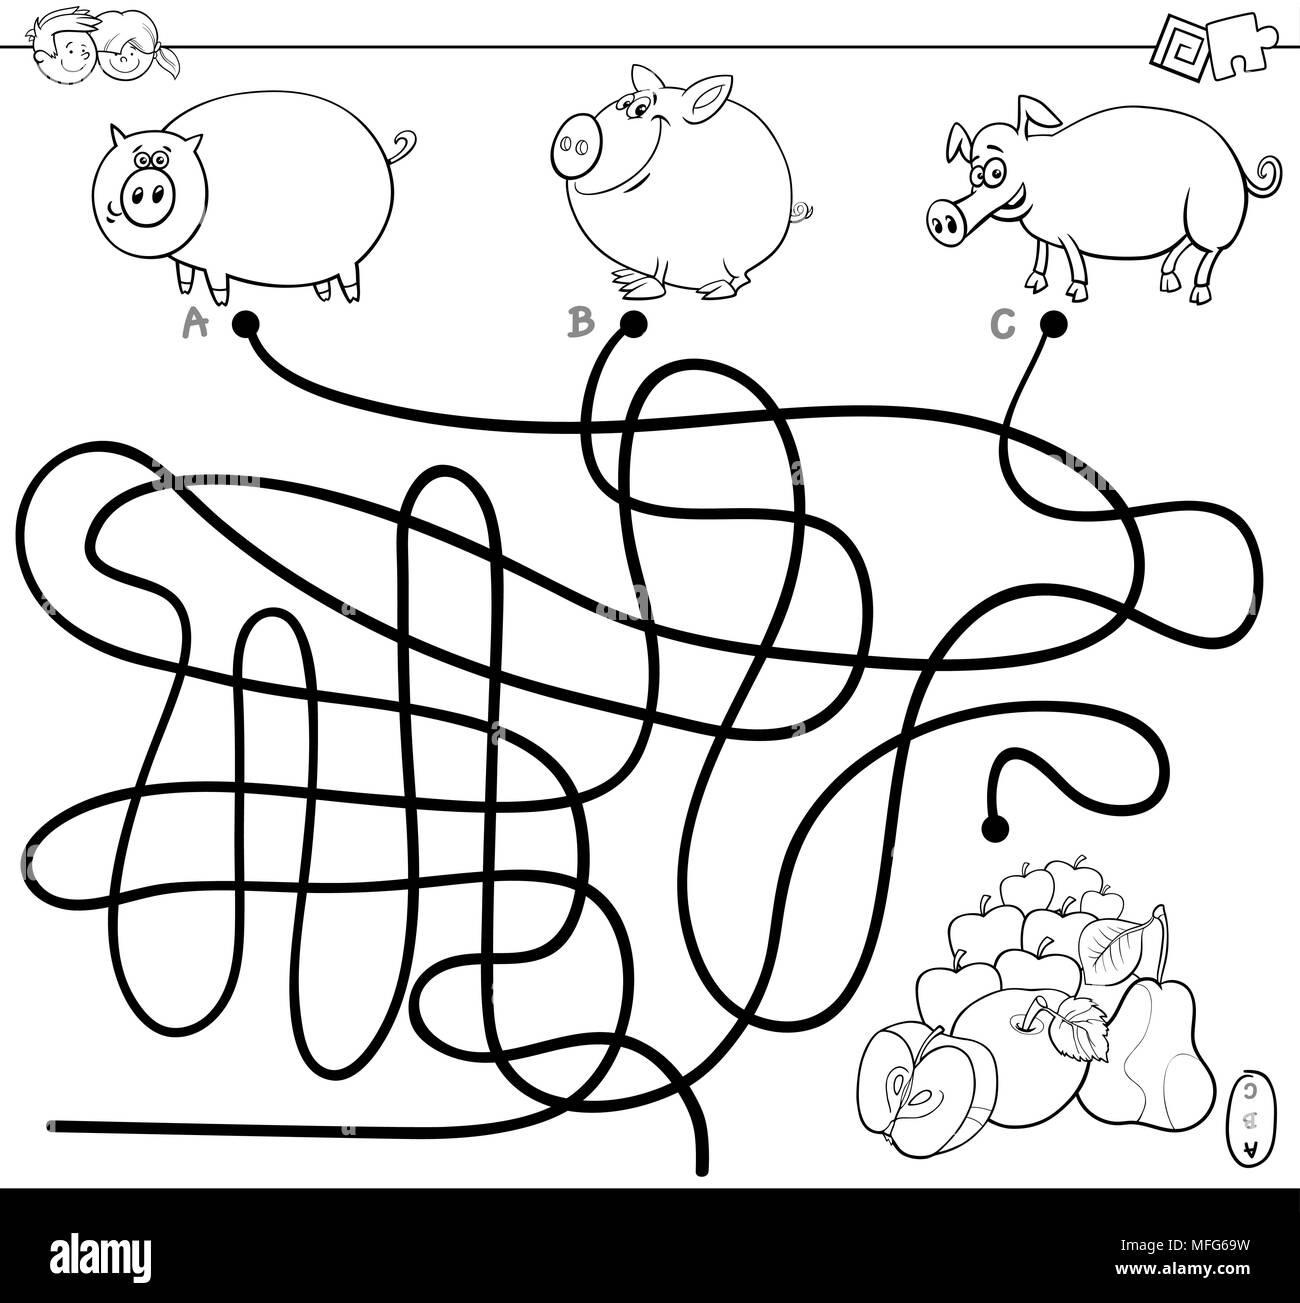 Black and White Cartoon Illustration of Paths or Maze Puzzle Activity Game with Pigs Farm Animal Characters Coloring Book Stock Vector